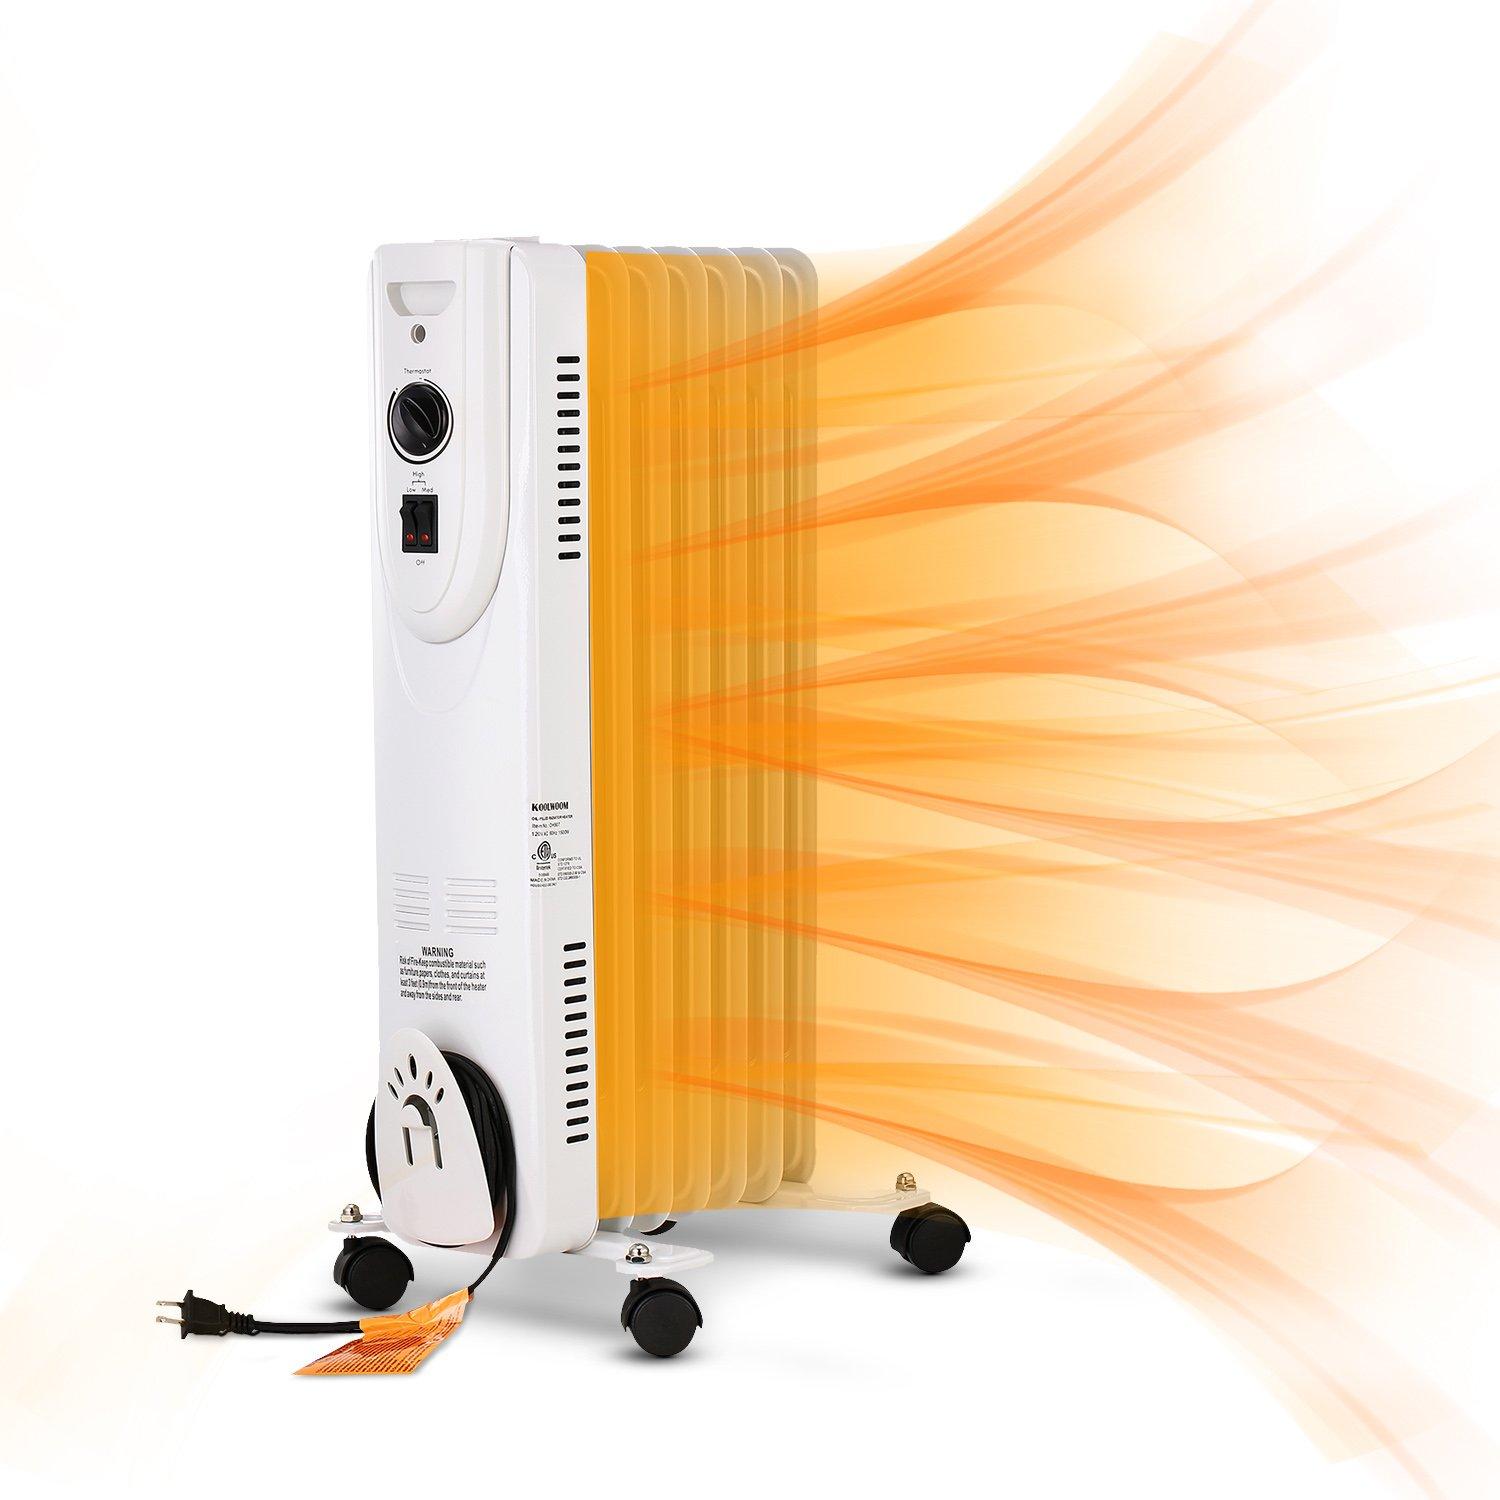 Ainfox 1500W Electric Oil Filled Radiator Space Heater for $25.99 Shipped